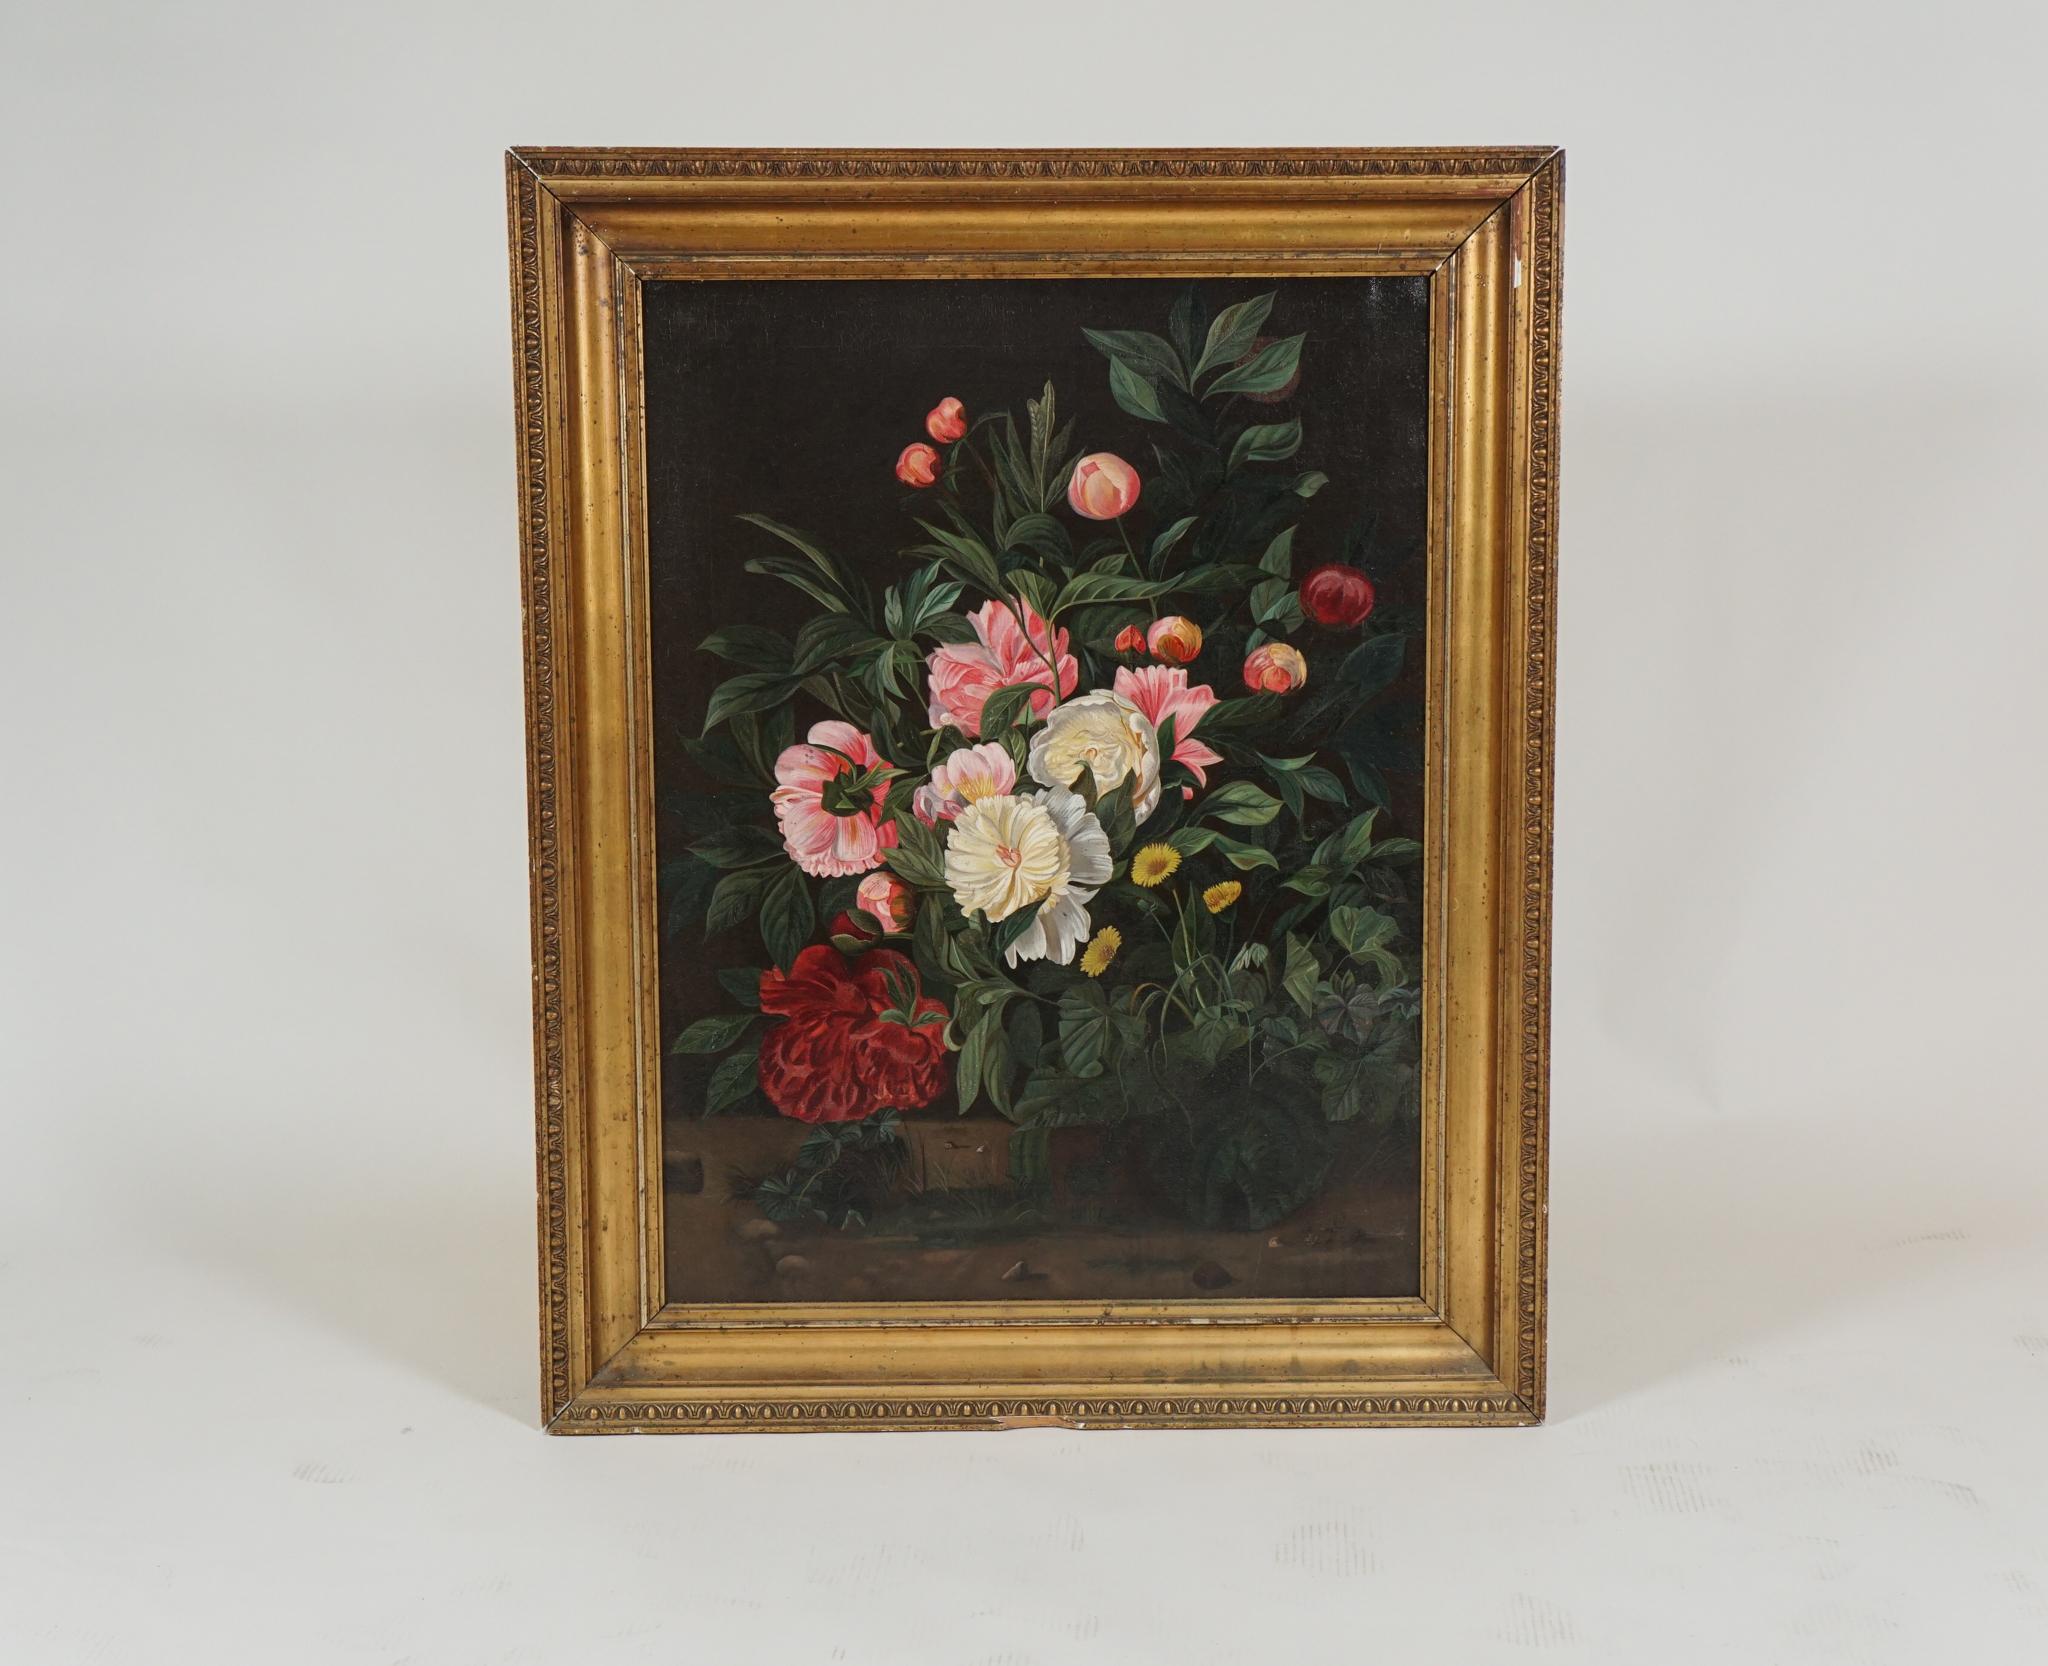 Mid-19th century European flower painting, in the style of the Dutch school, depicting a bouquet of peonies, with yellow daisies on a black background. Original gilded frame.